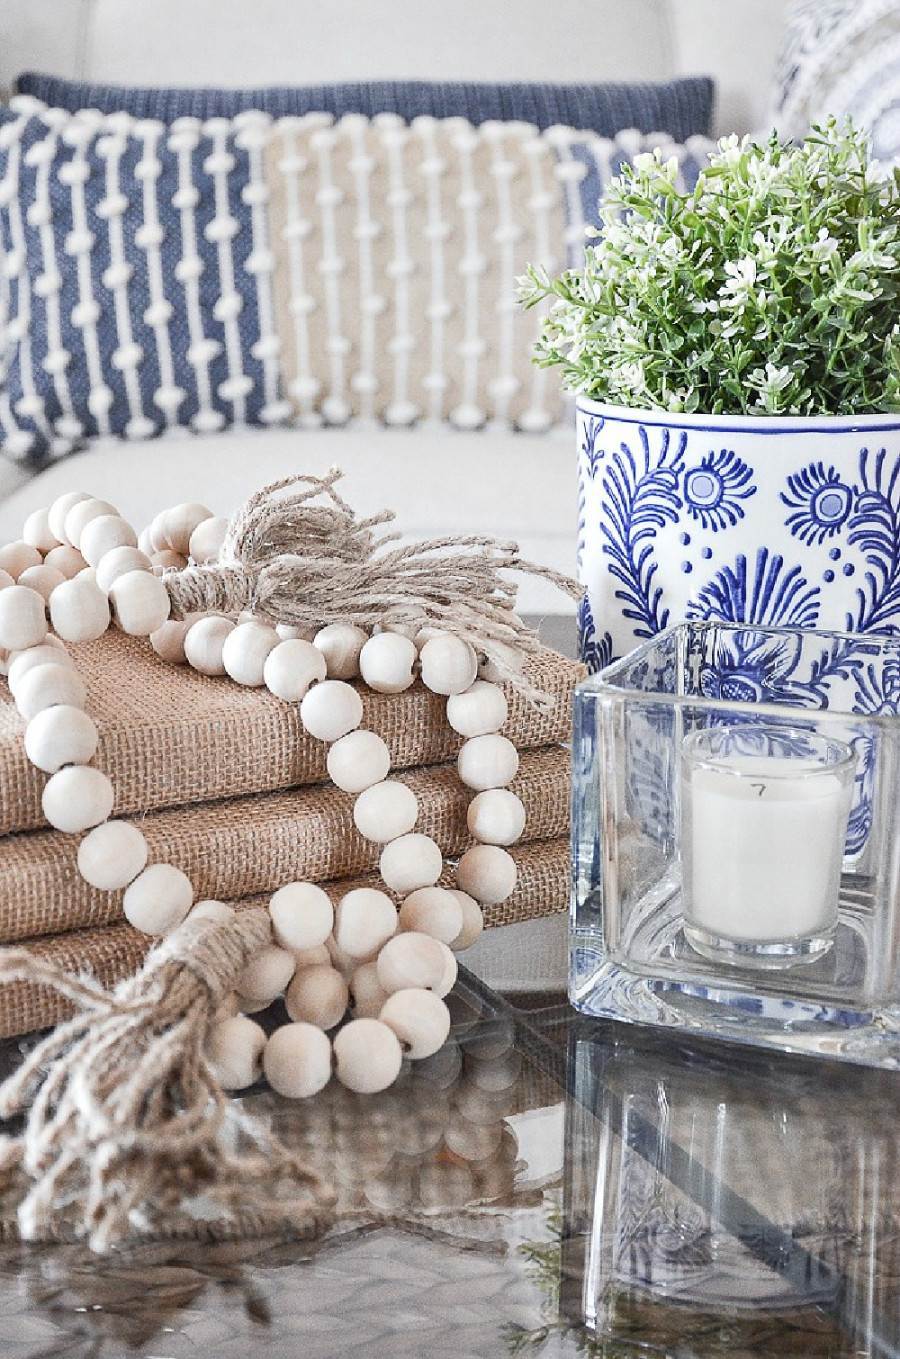 HOW TO USE BLUE AND WHITE IN YOUR HOME